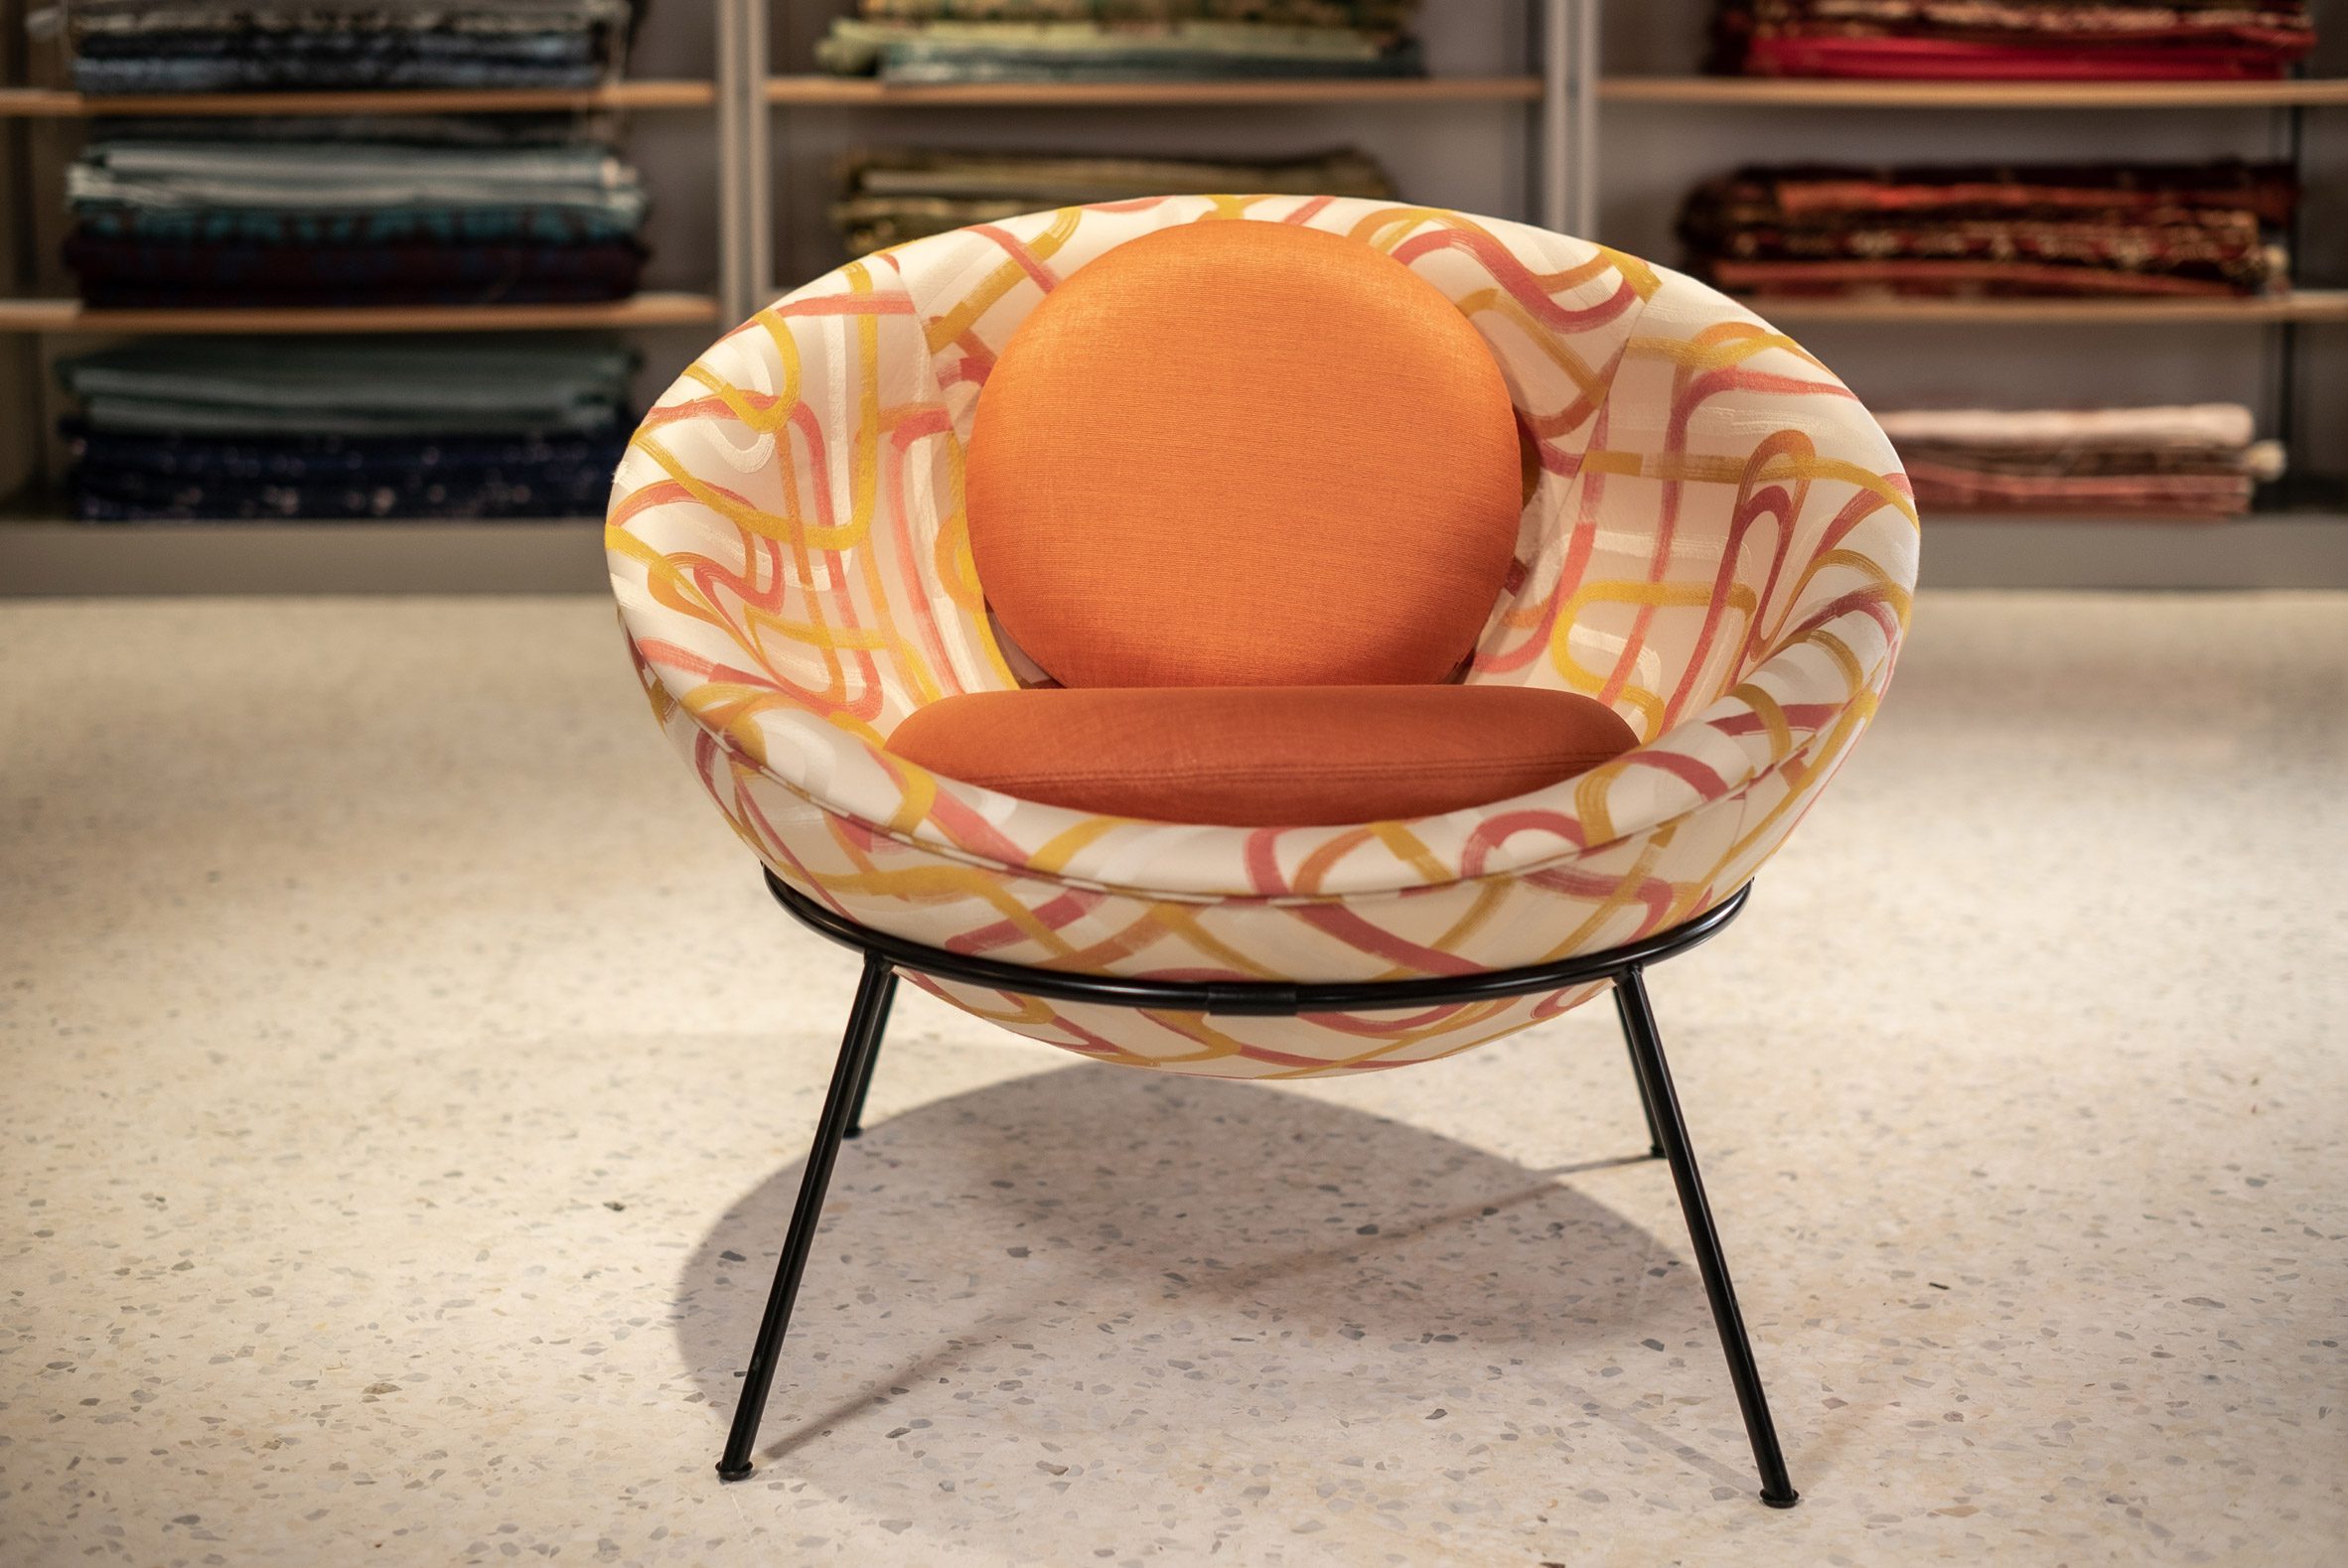 A photograph of the Bardi's Bowl Chair by Lina Bo Bardi for Arper in Lollipop fabric